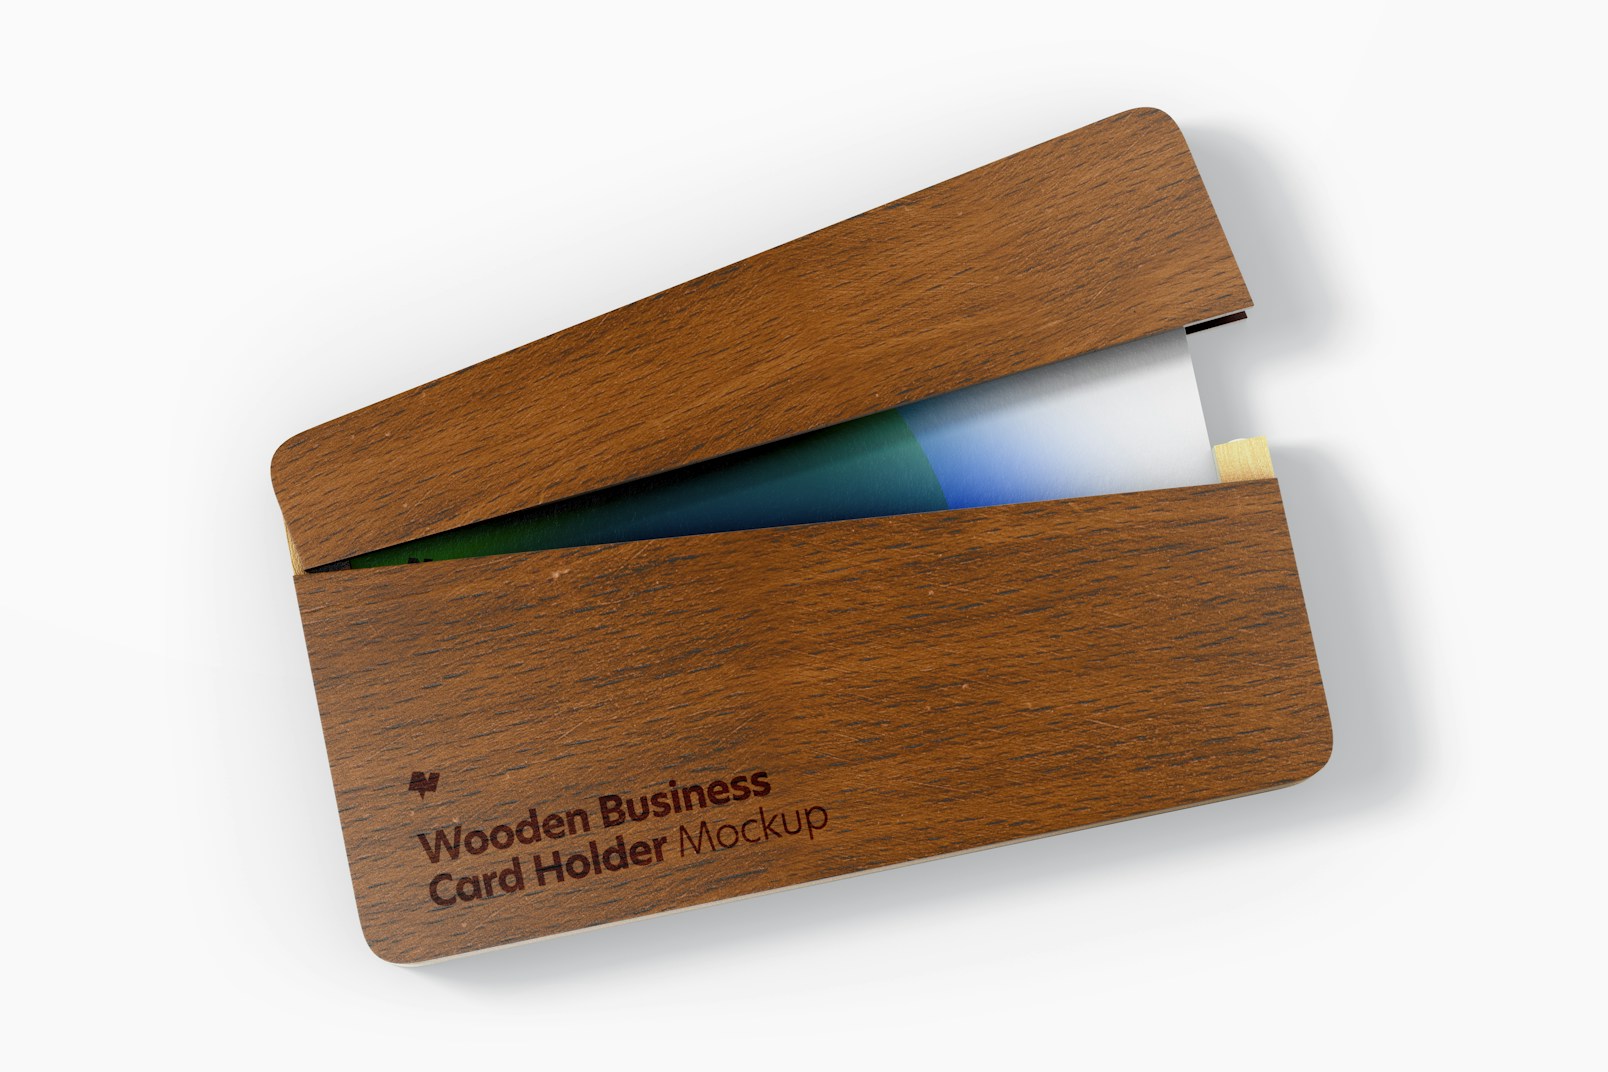 Wooden Business Card Holder Mockup, Top View